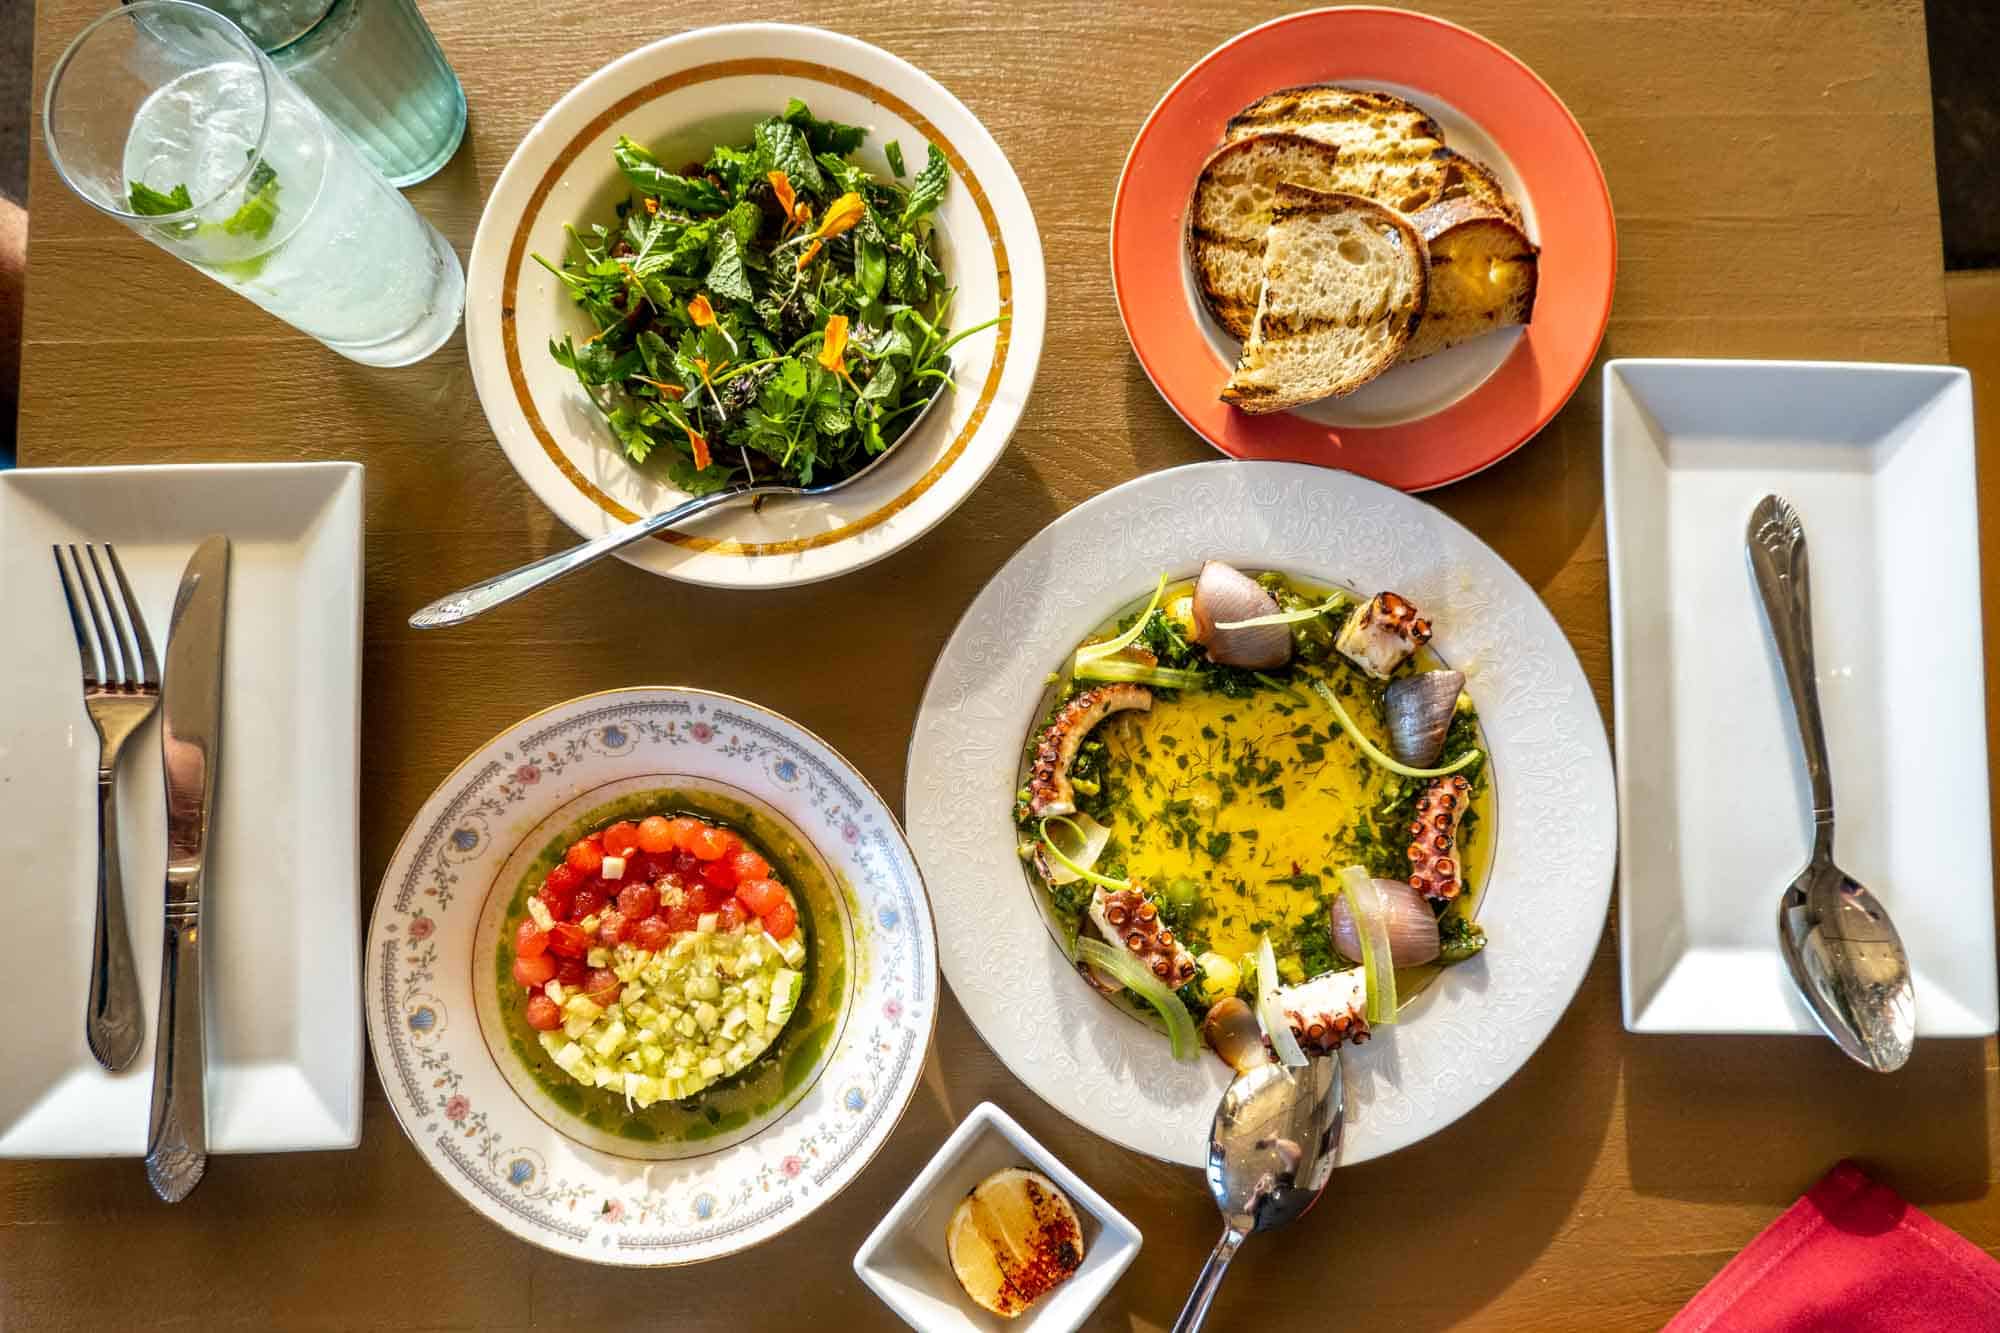 Plates on a table with salad, bread, grilled octopus, and other dishes